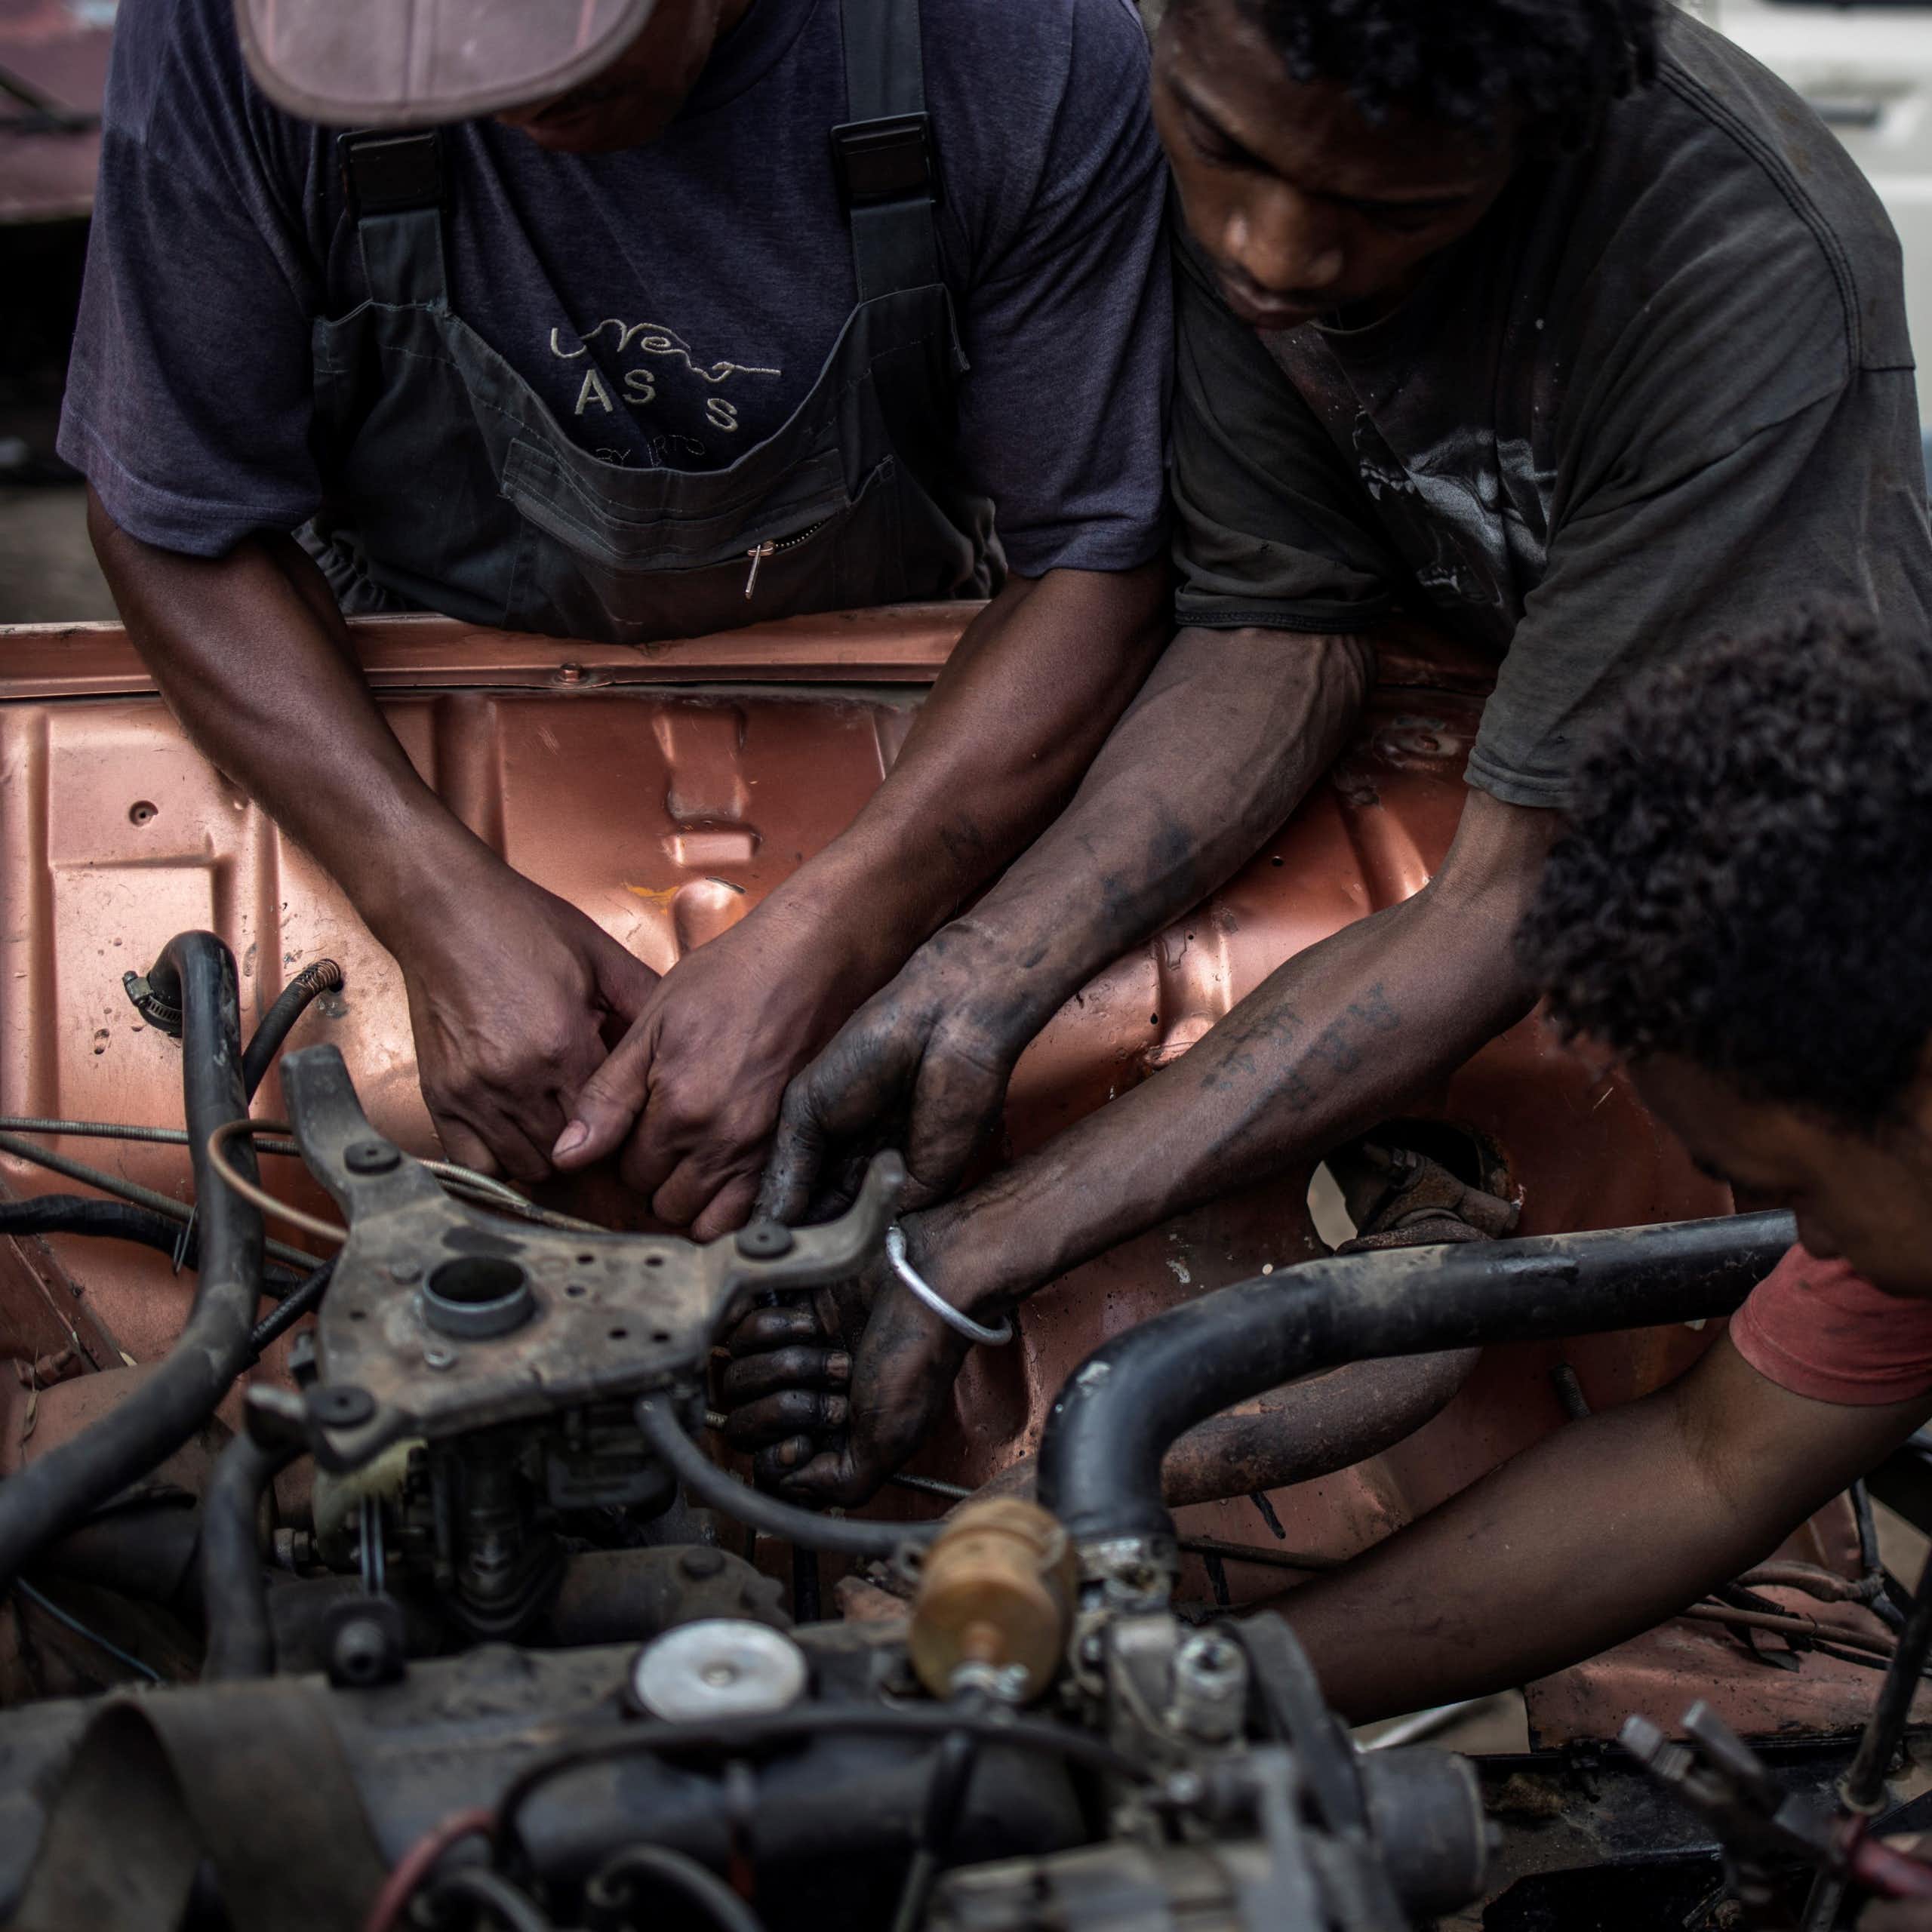 Young mechanics work on the engine of a car.